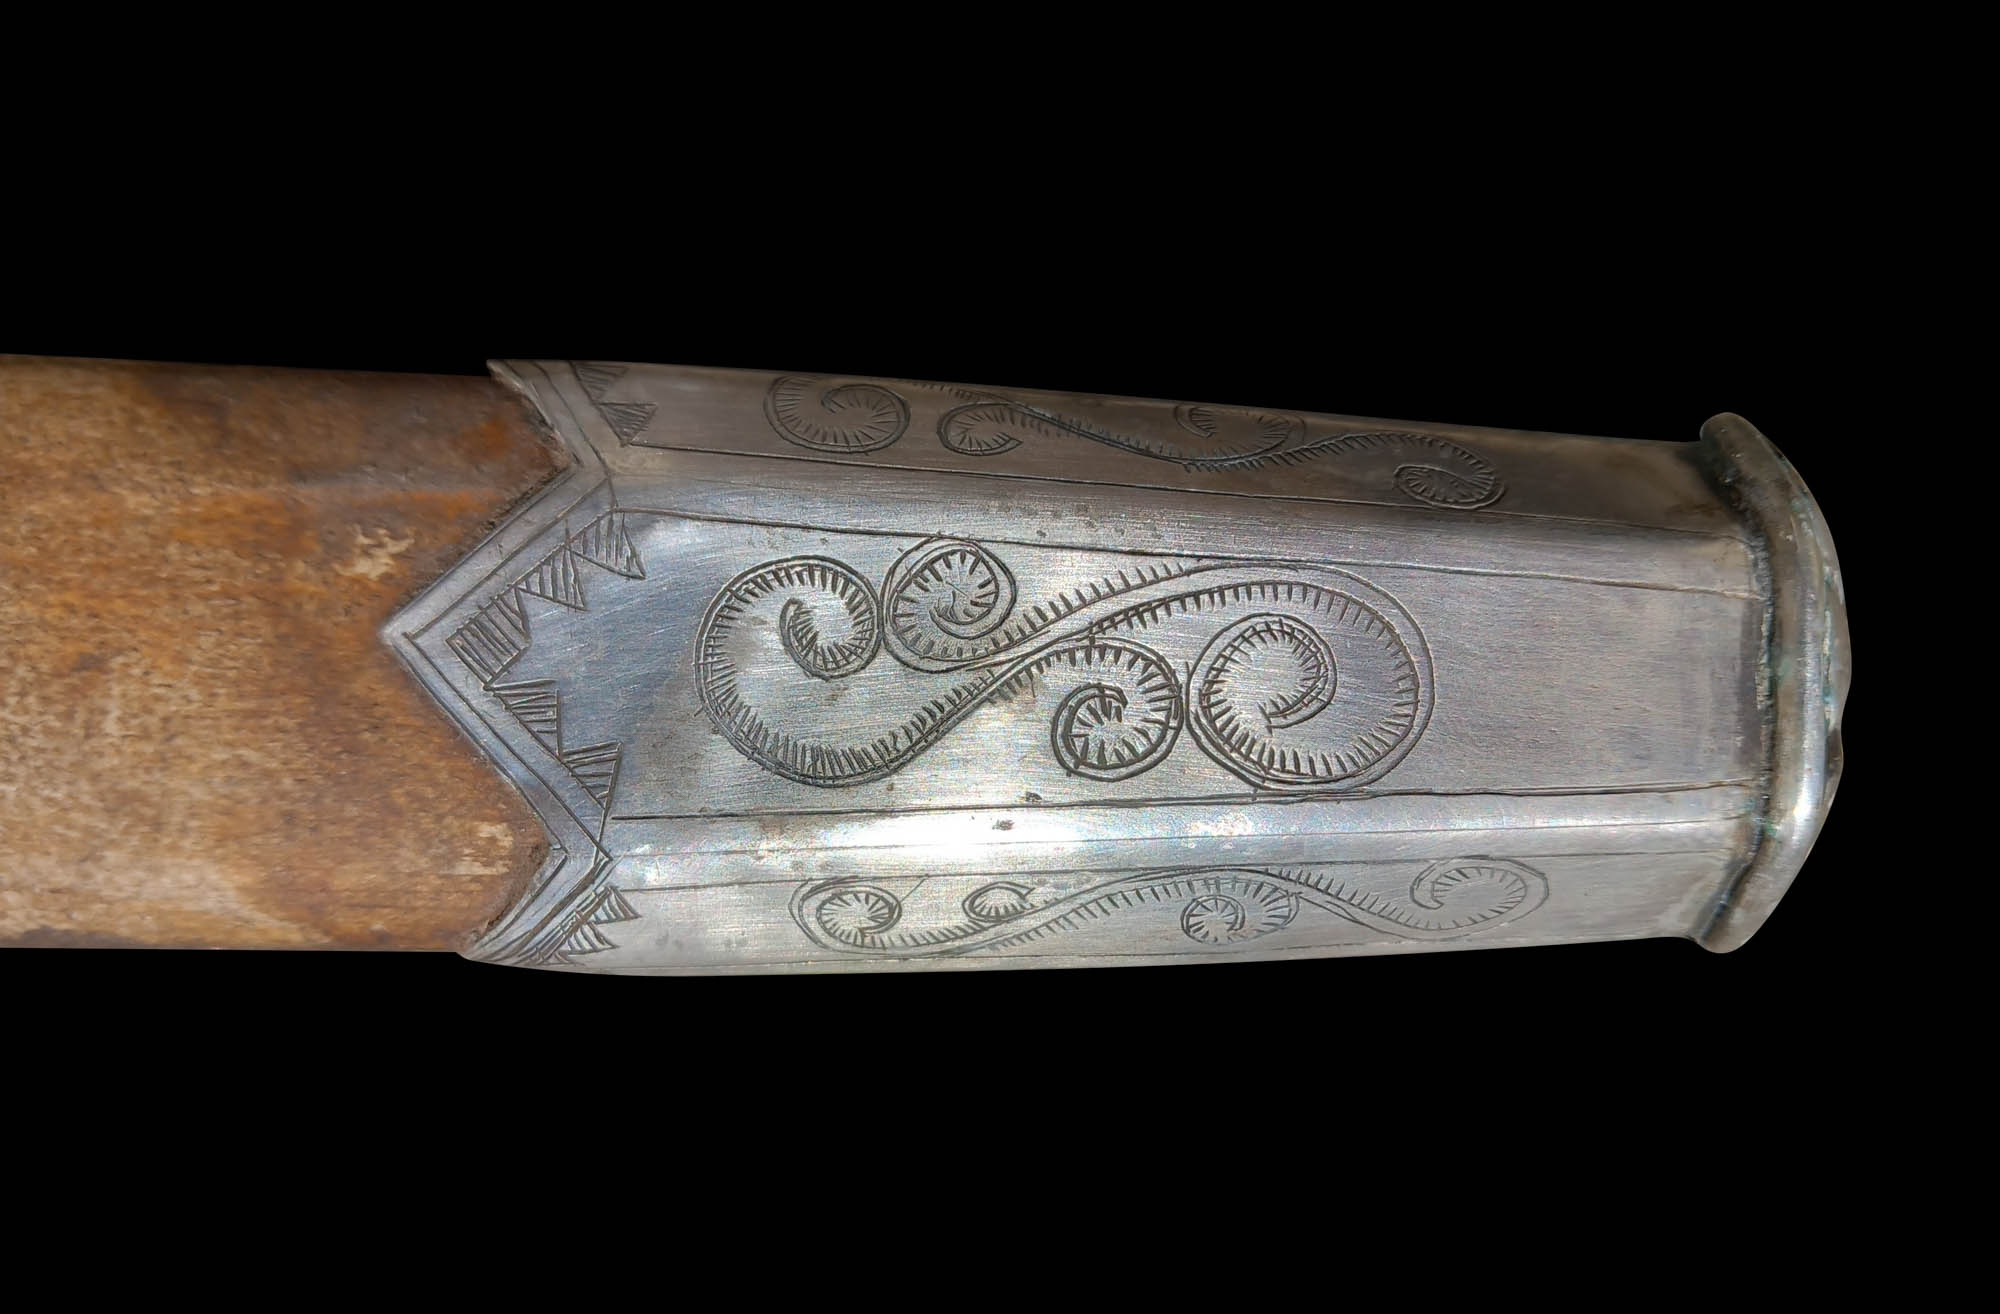 AMAZING SABER SWORD DECORATED WITH FAMILY ARMS - FULL REPORT - Image 12 of 28